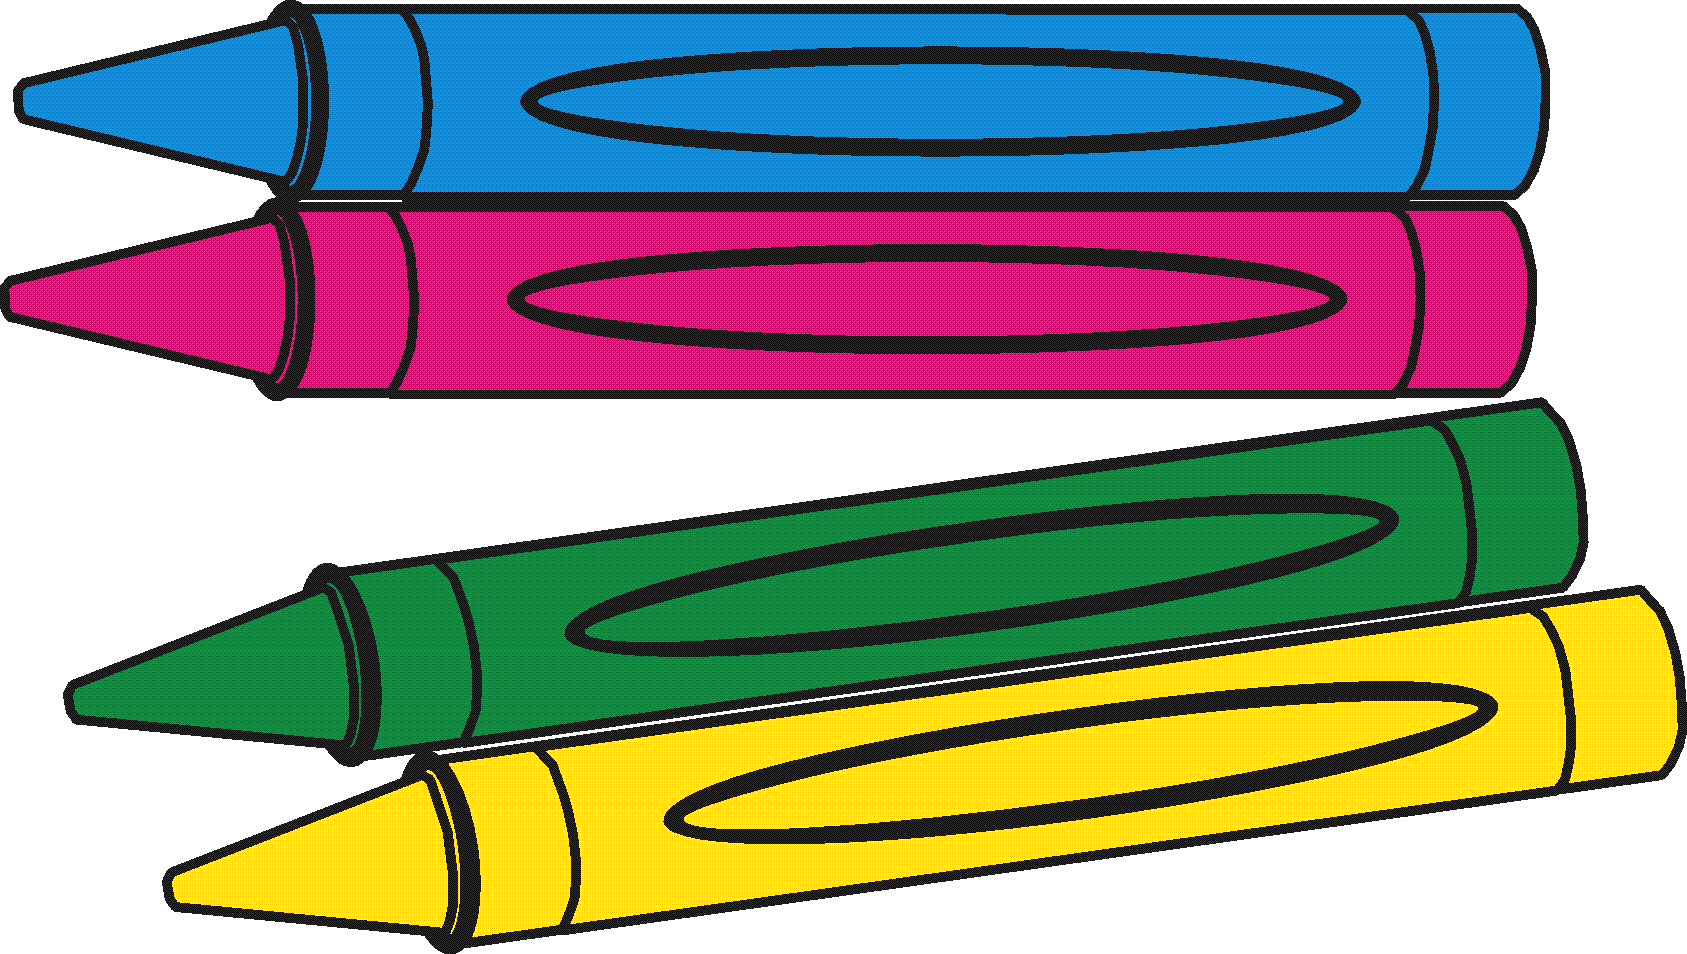 Crayons clipart black and white free clipart images - Clipartix